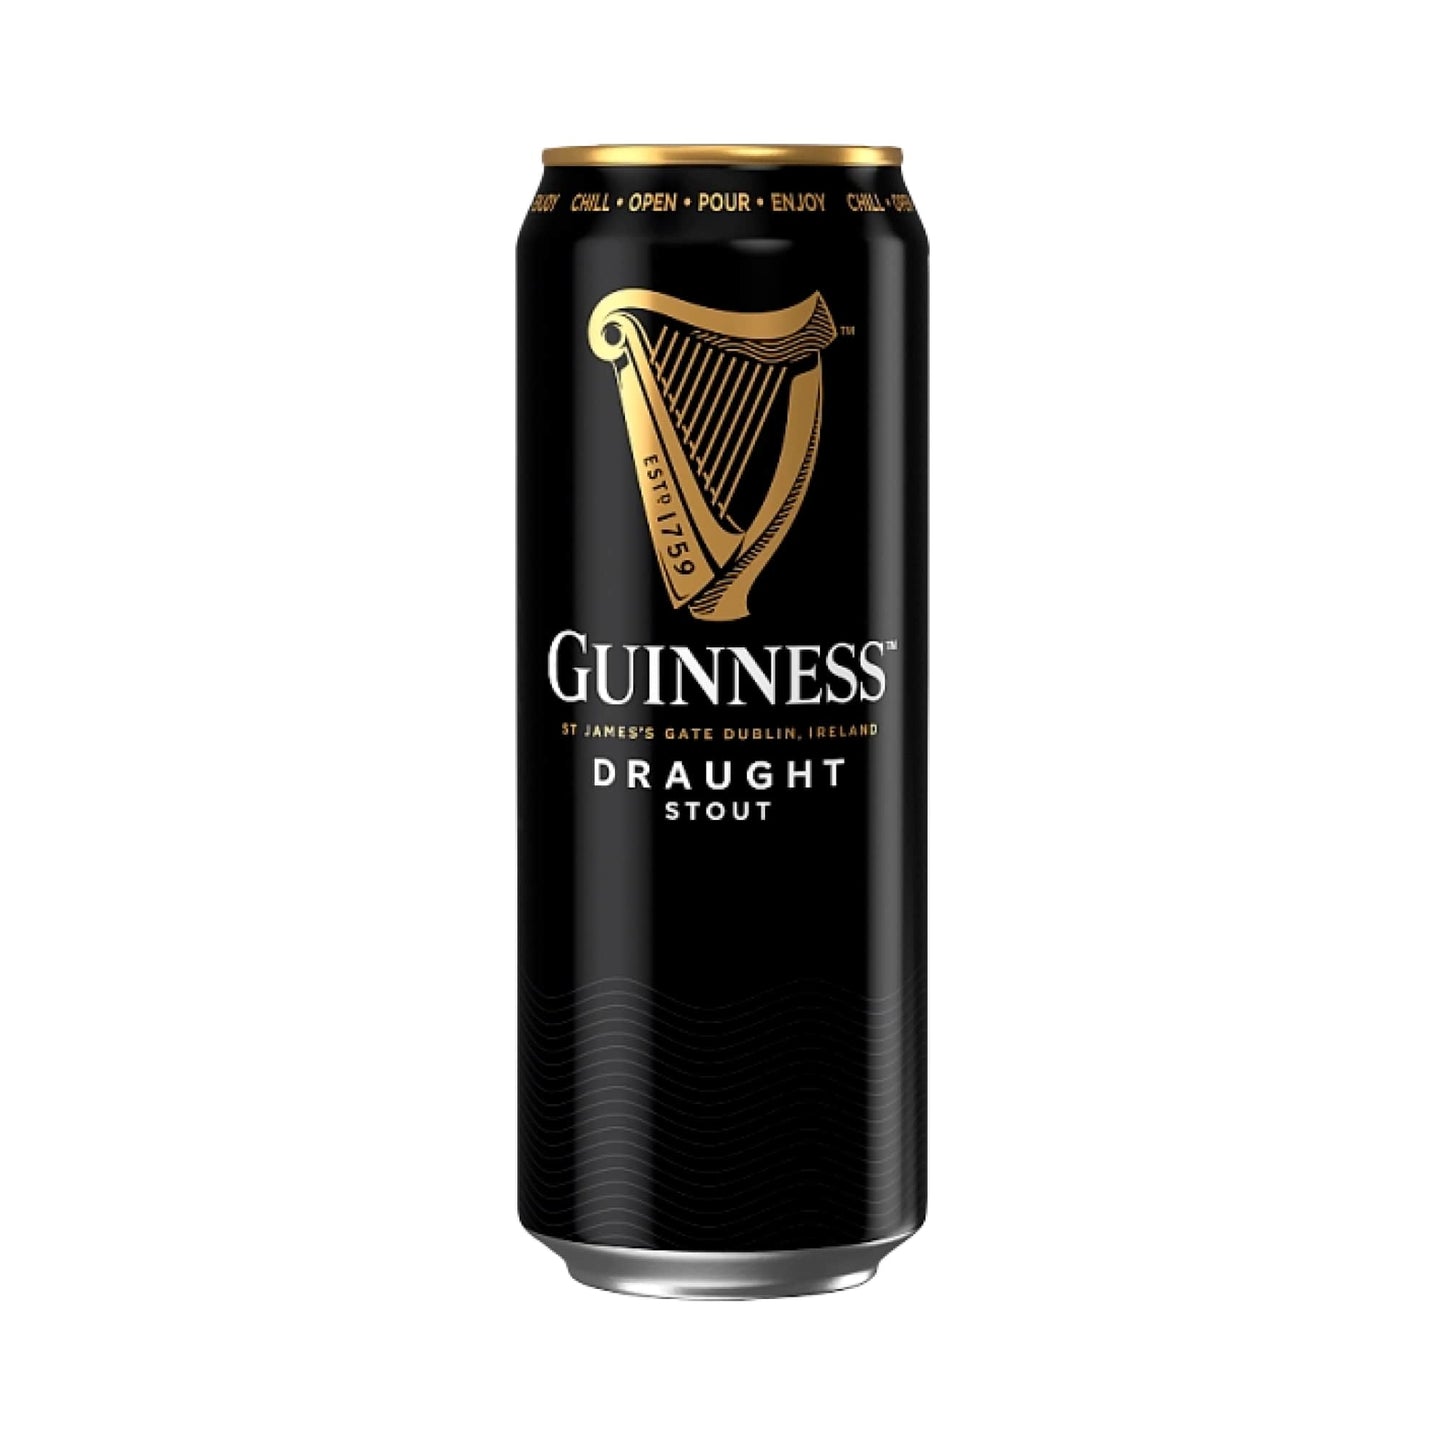 Guinness UK pint glass + can of Guinness draught beer on a white background.